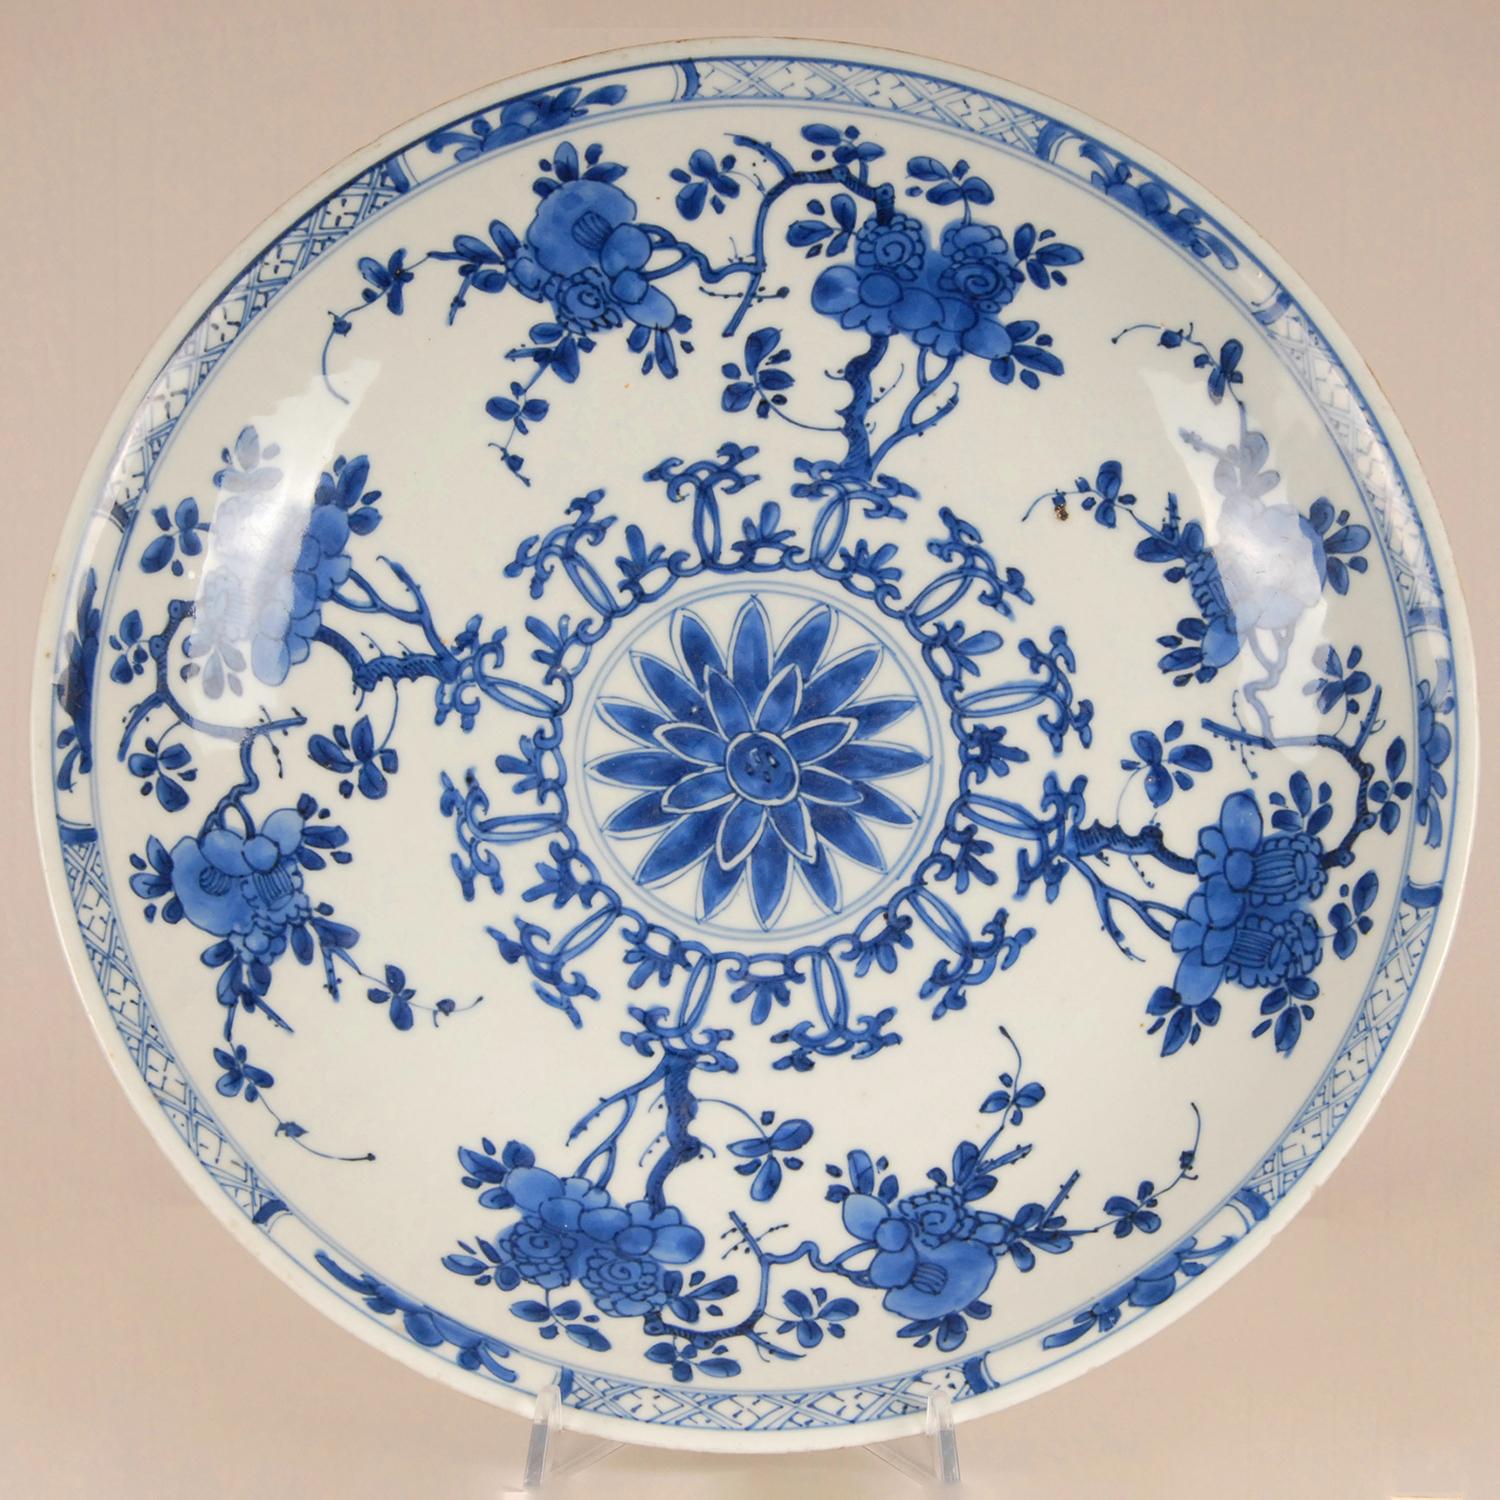 A large antique Chinese porcelain blue and white Kangxi charger
Blue and white ceramic deep dish.
Material: Chinese porcelain, Ceramic
Style: Chinese, Antique, Baroque, Persian
Origin: China, early 17th century
Description: Large Chinese porcelain